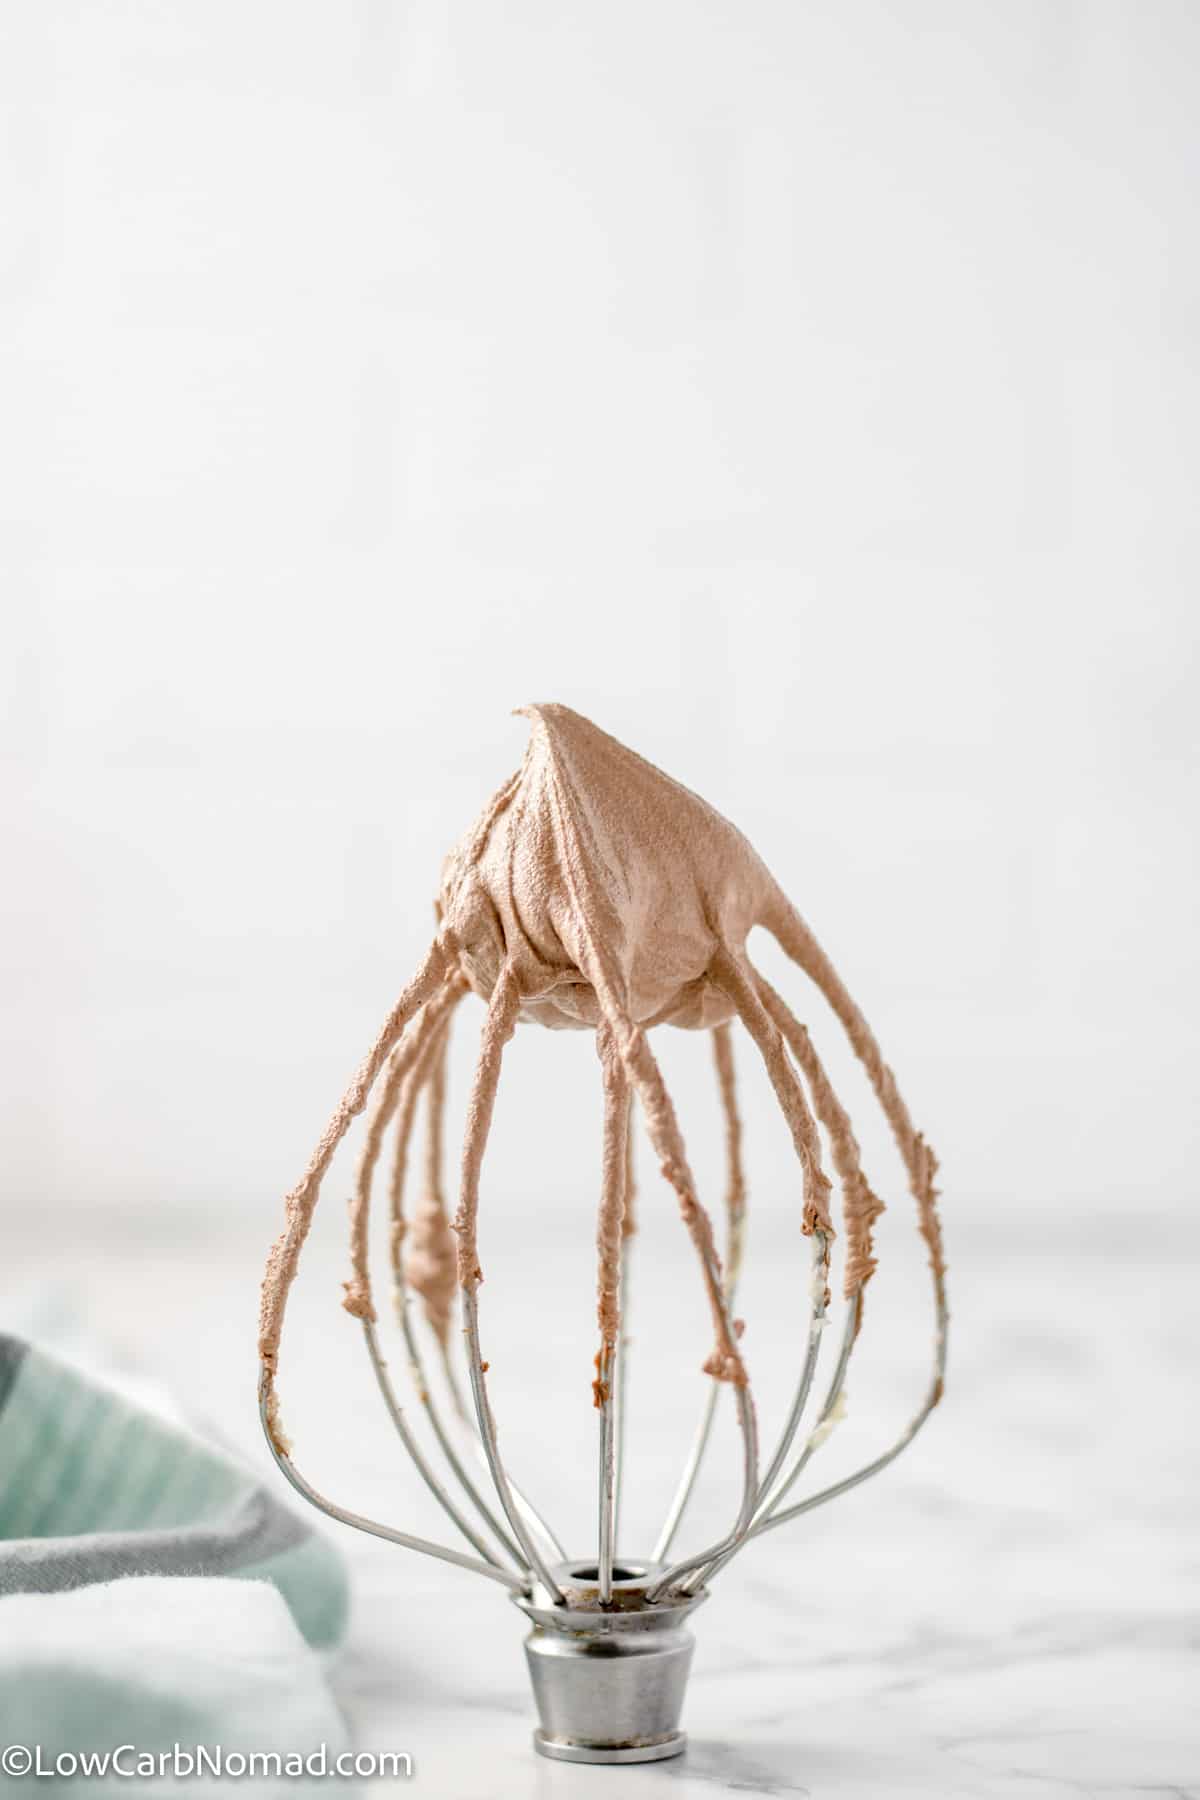 Sugar free chocolate buttercream Frosting on the whisk of a stand mixer